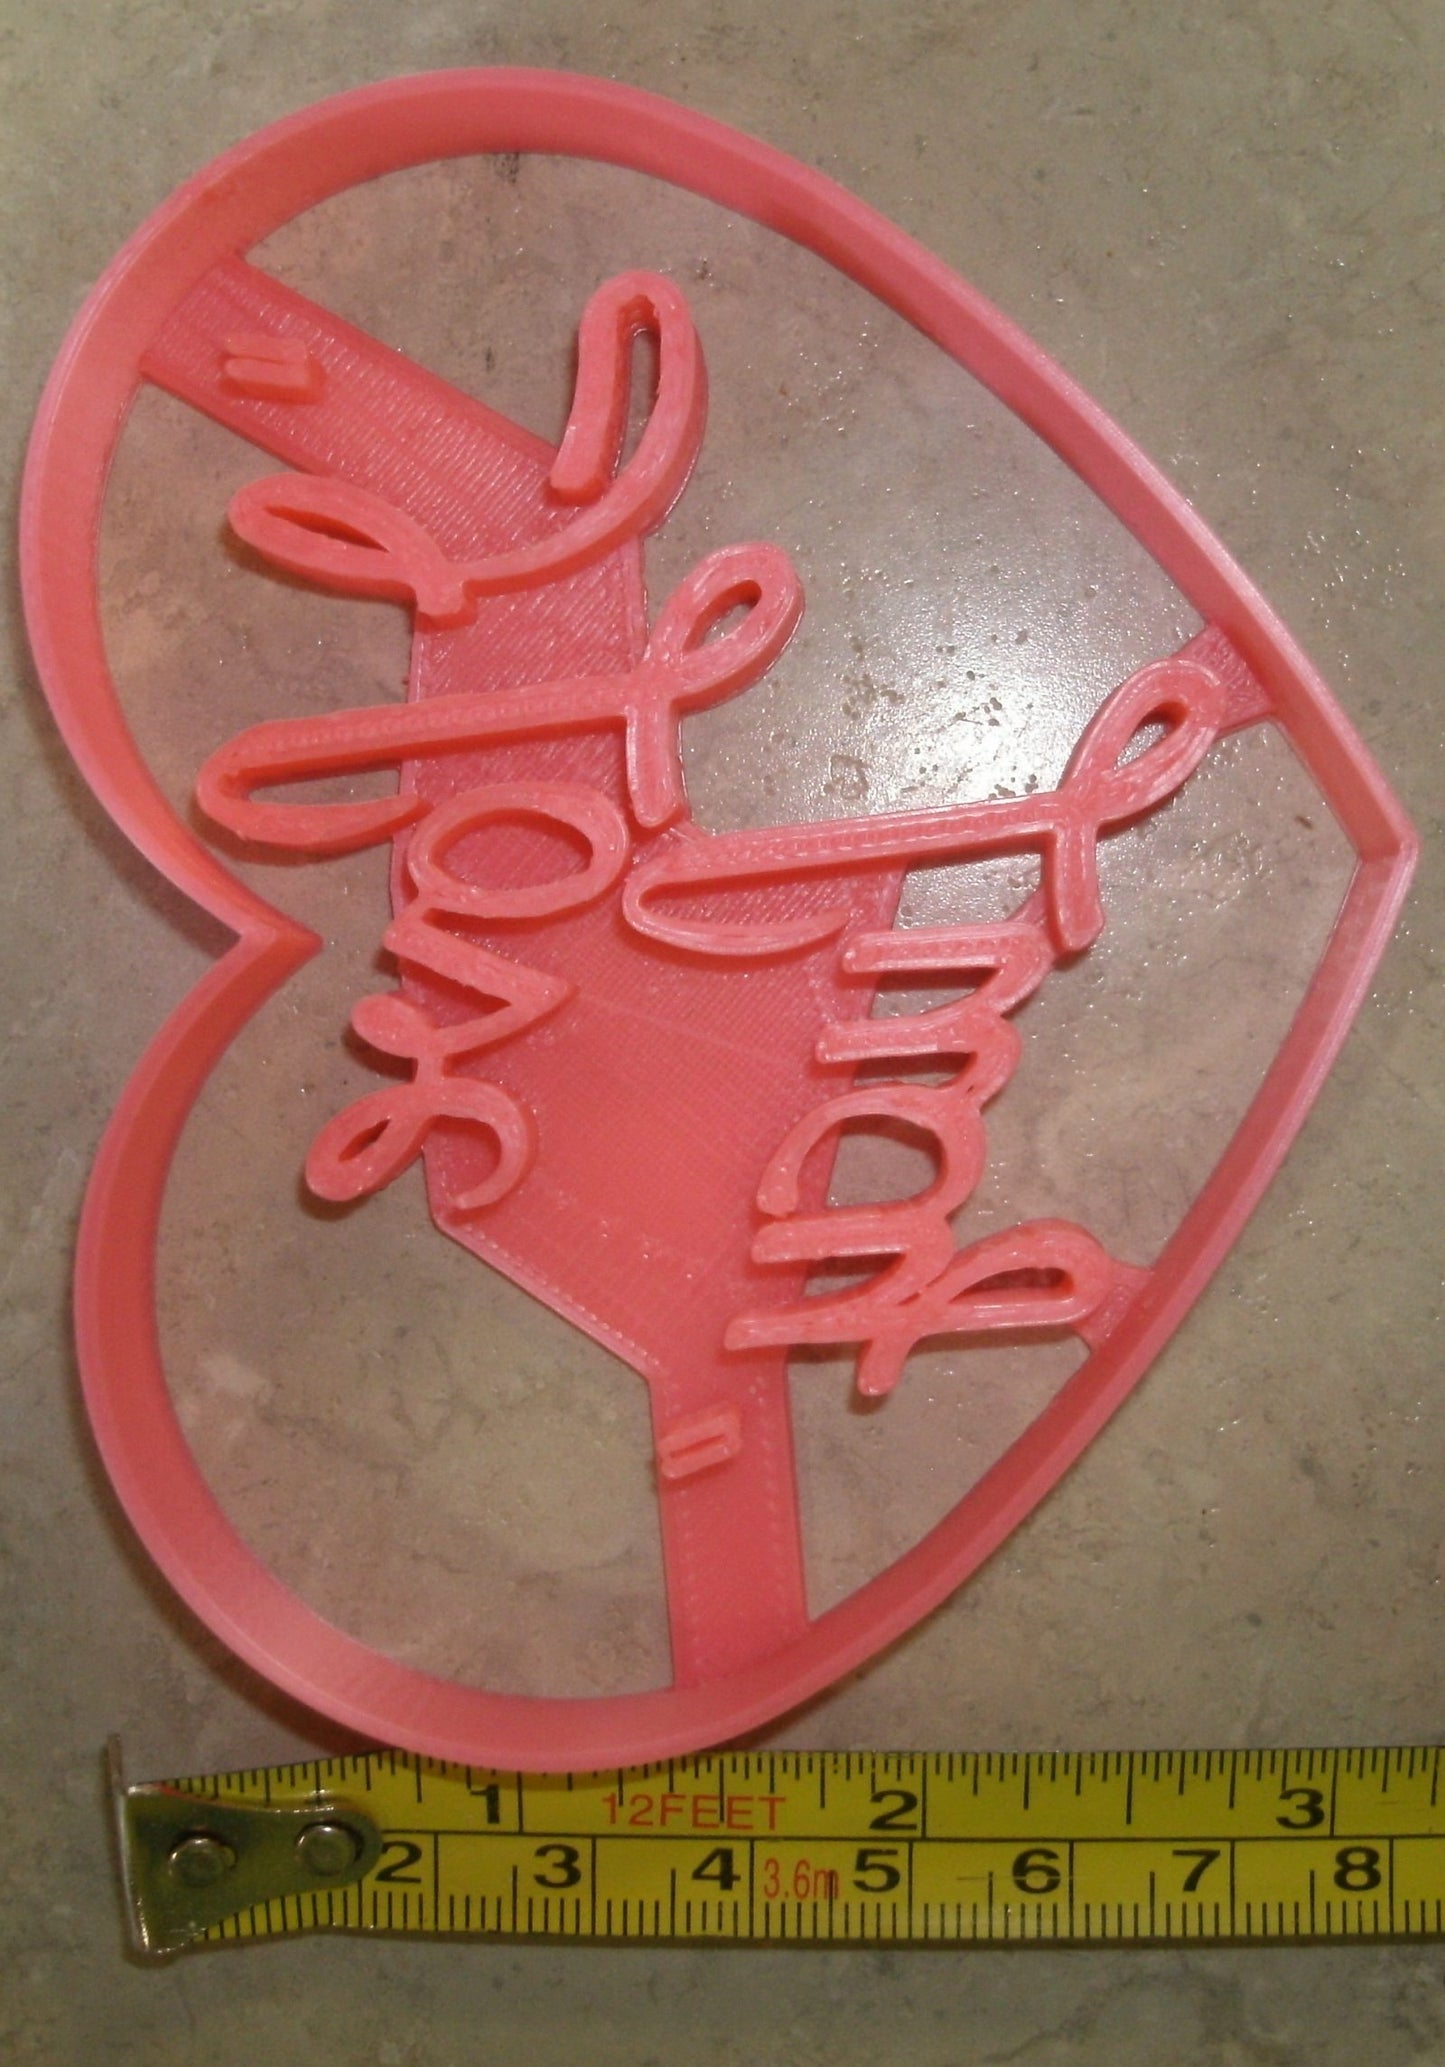 I Love Lucy Old Sitcom 1950s TV Show Heart Logo Cookie Cutter USA PR2869